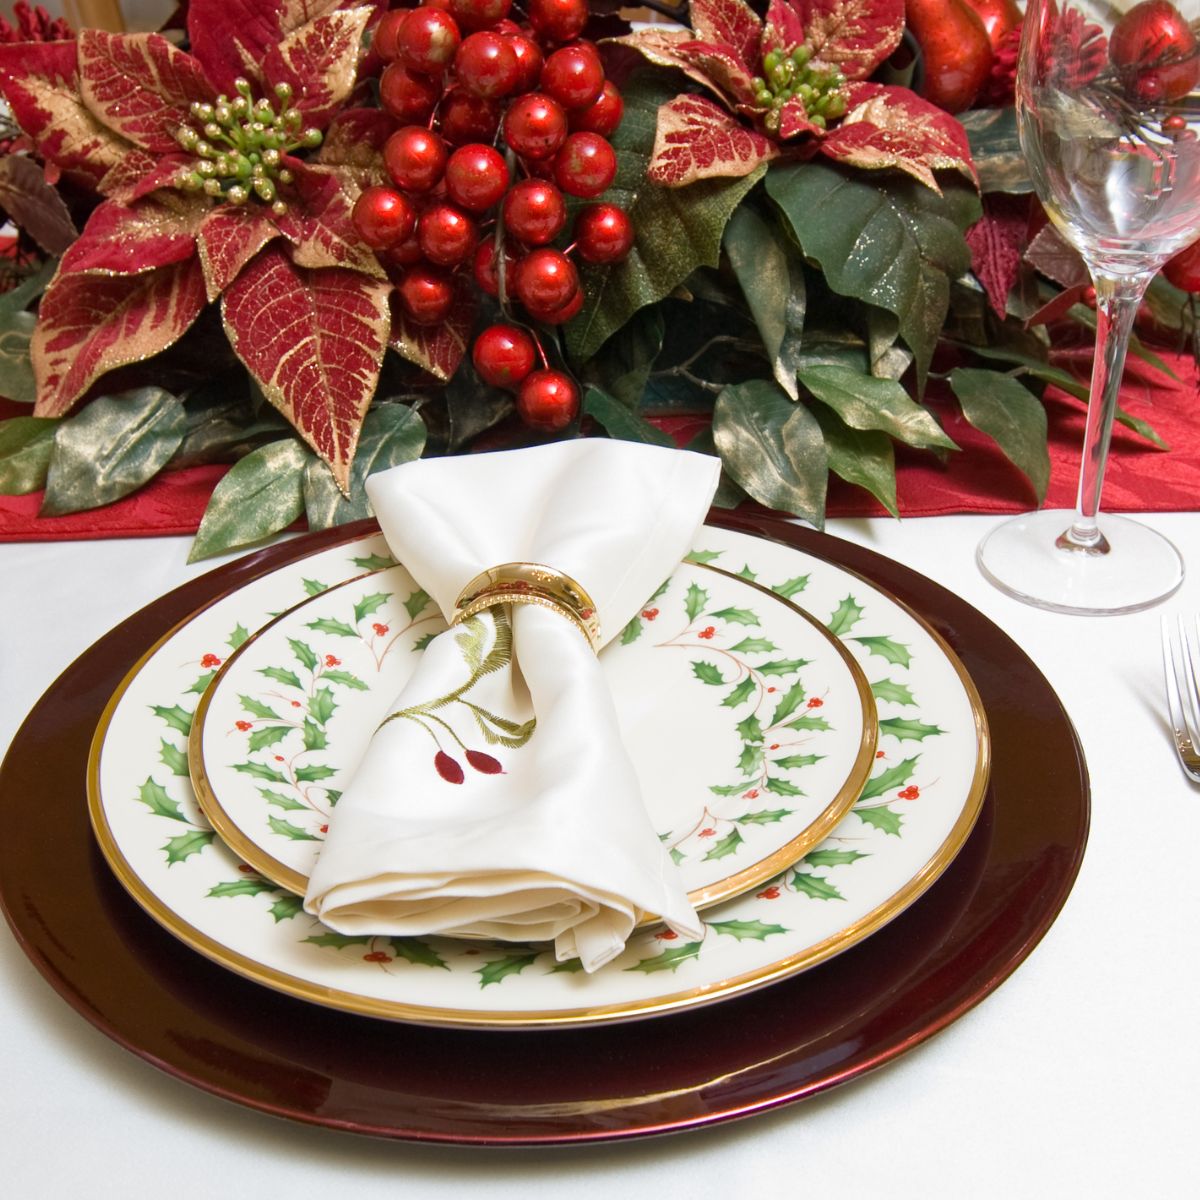 Christmas plates set up for dinner with poinsettia in the background.